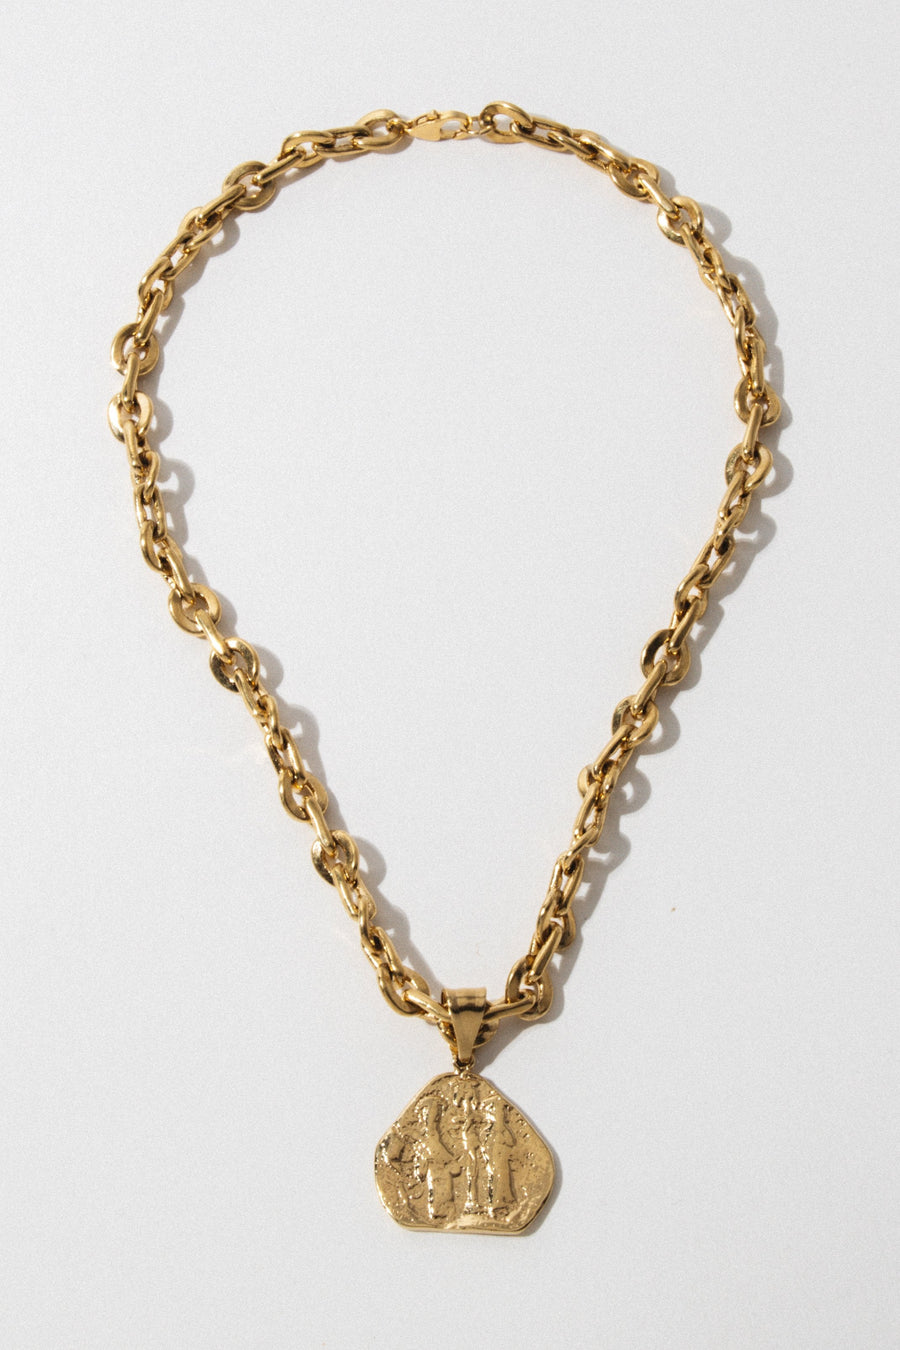 Goddess Jewelry 16 Inches / Gold Hierarchy Necklace